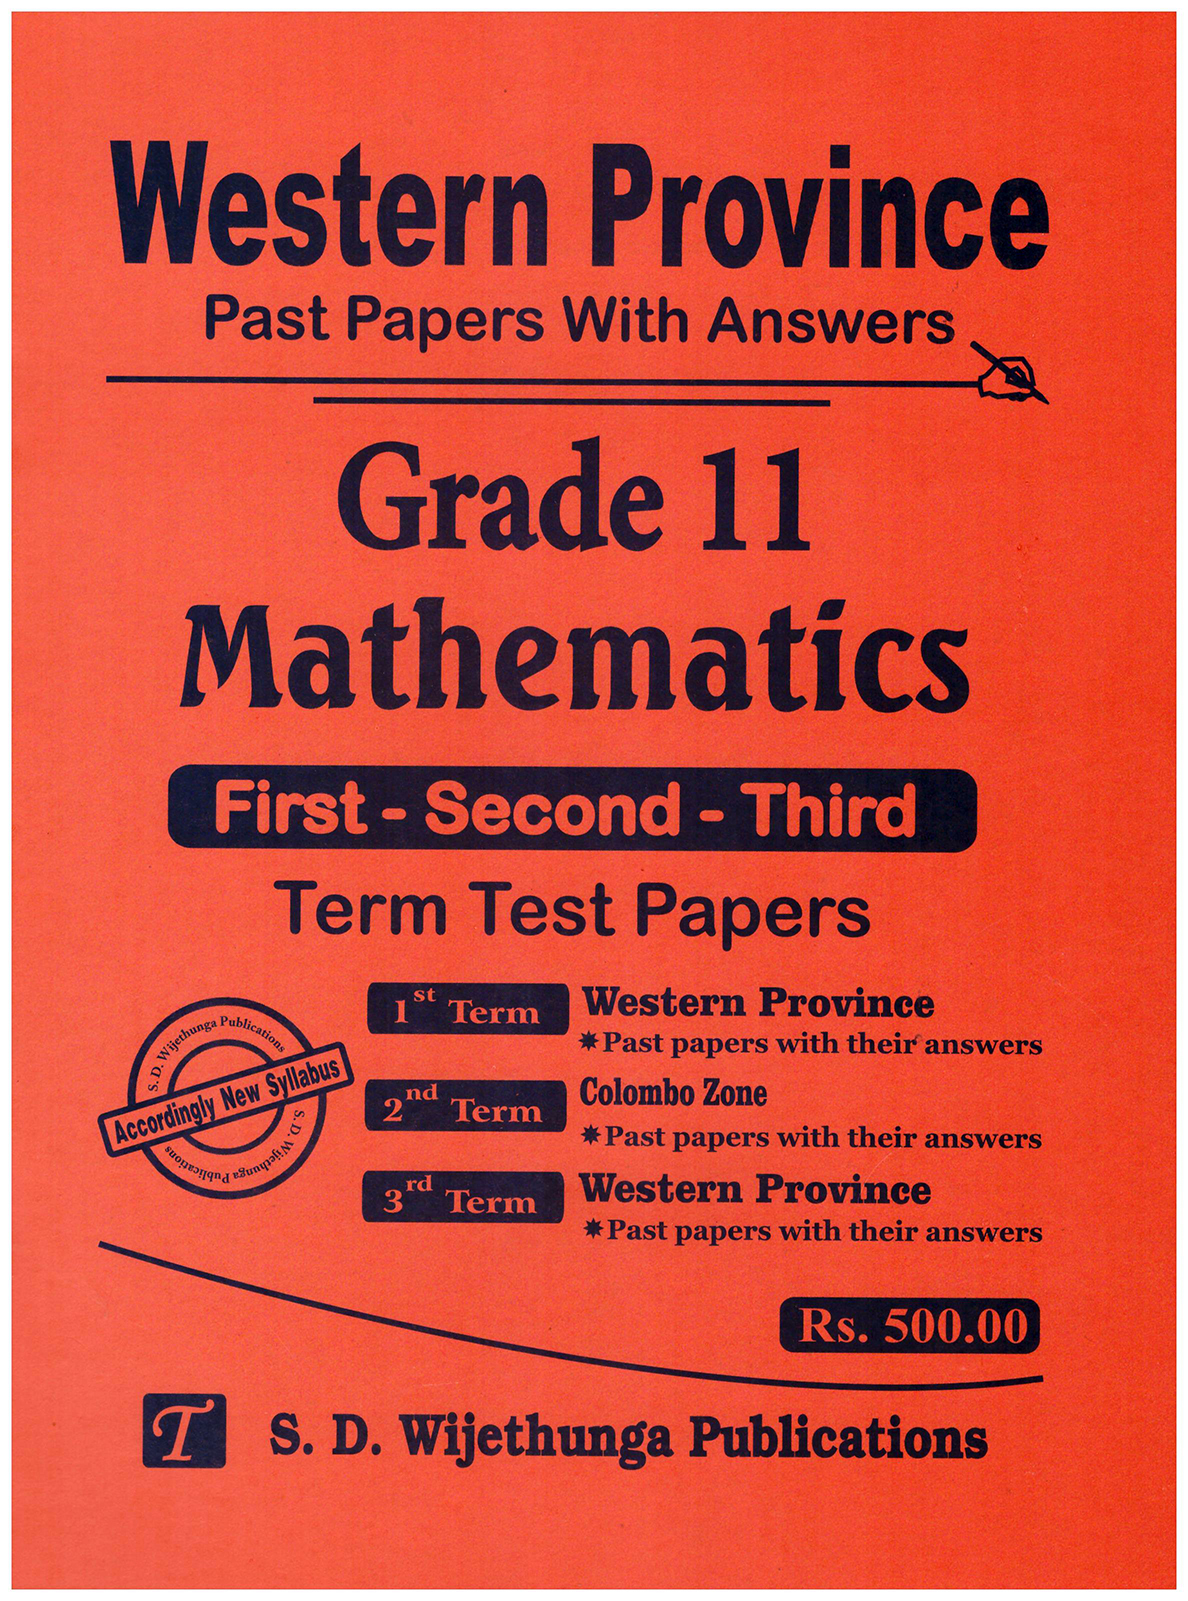 Western Province Past Papers With Answers Grade 11 Mathematics